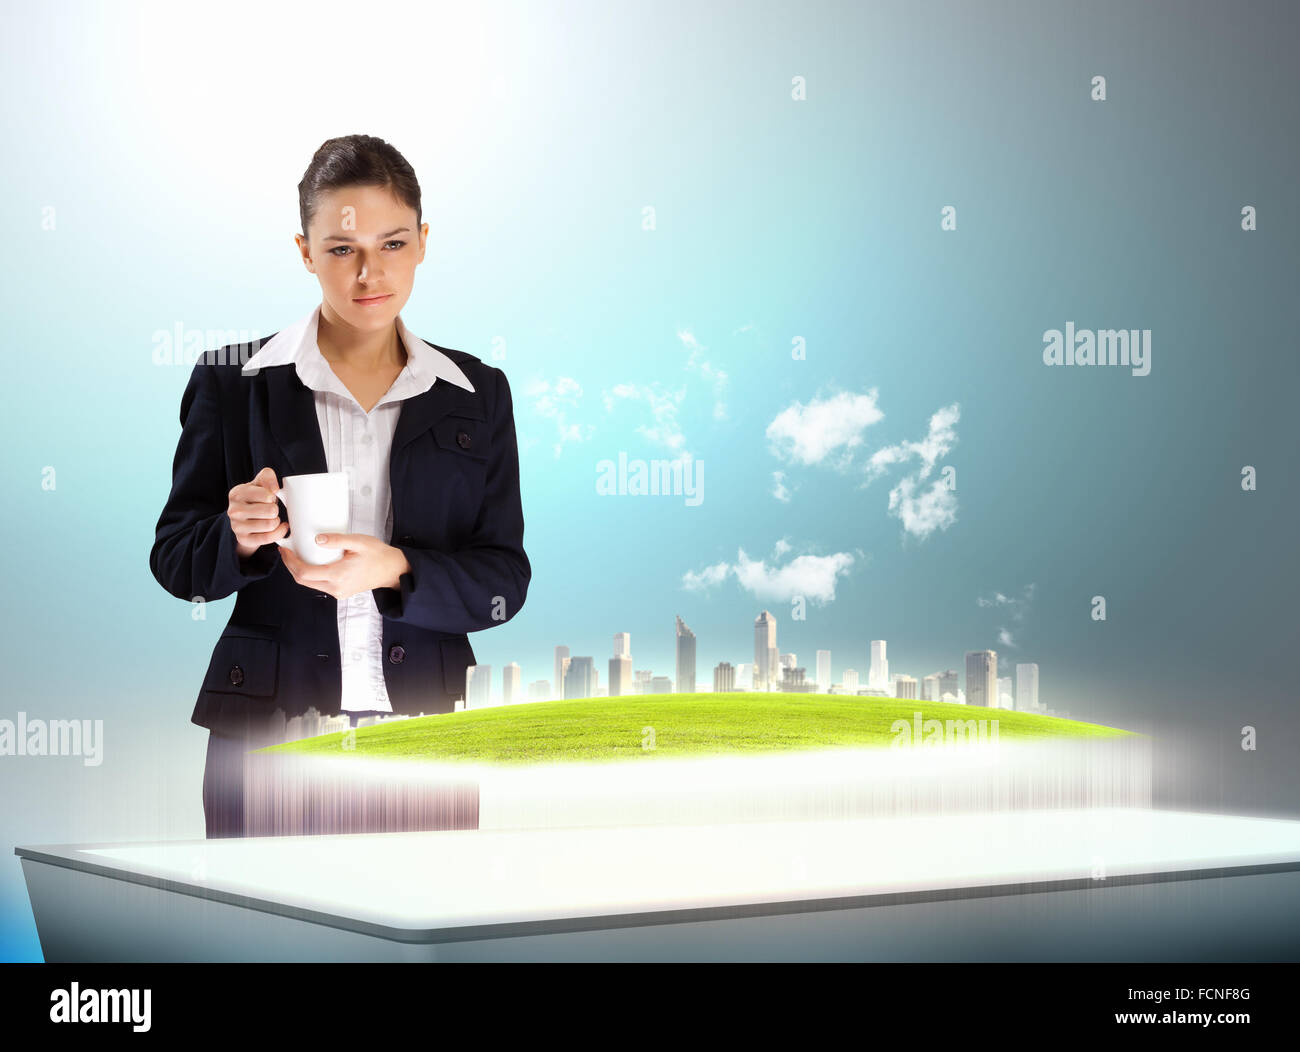 Image of young businesswoman holding cup standing against high-tech picture Stock Photo